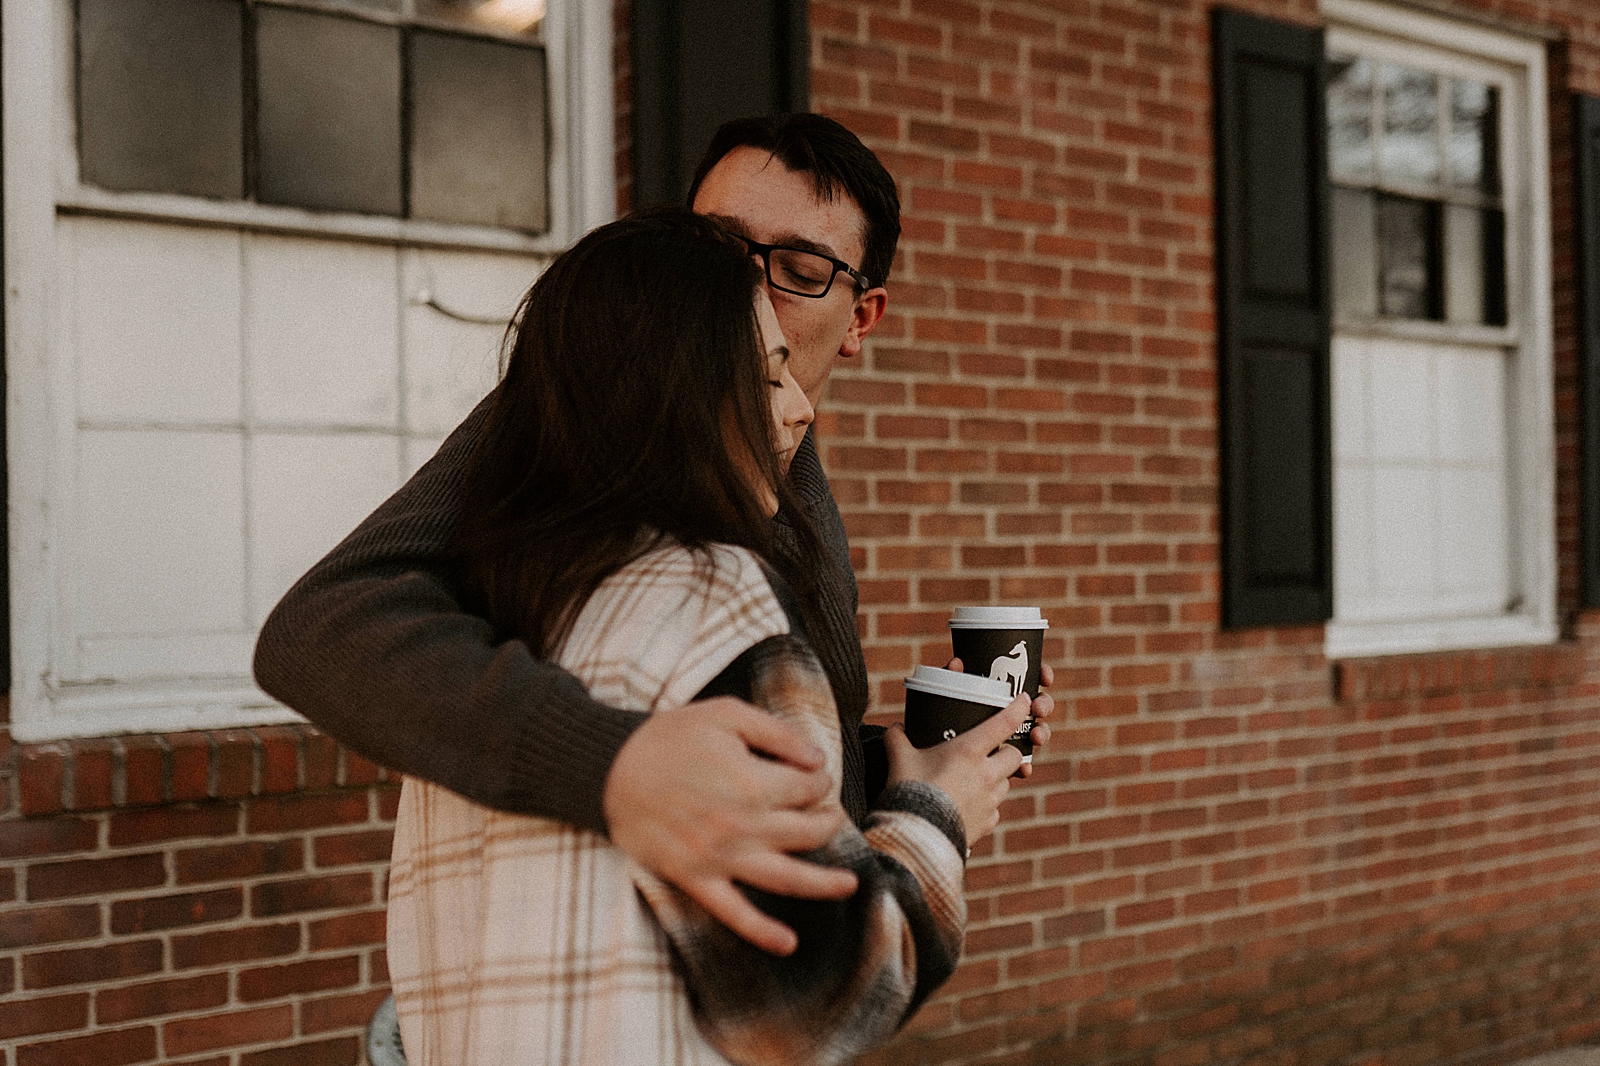 Man holding woman from the side and kissing head with coffees in hand